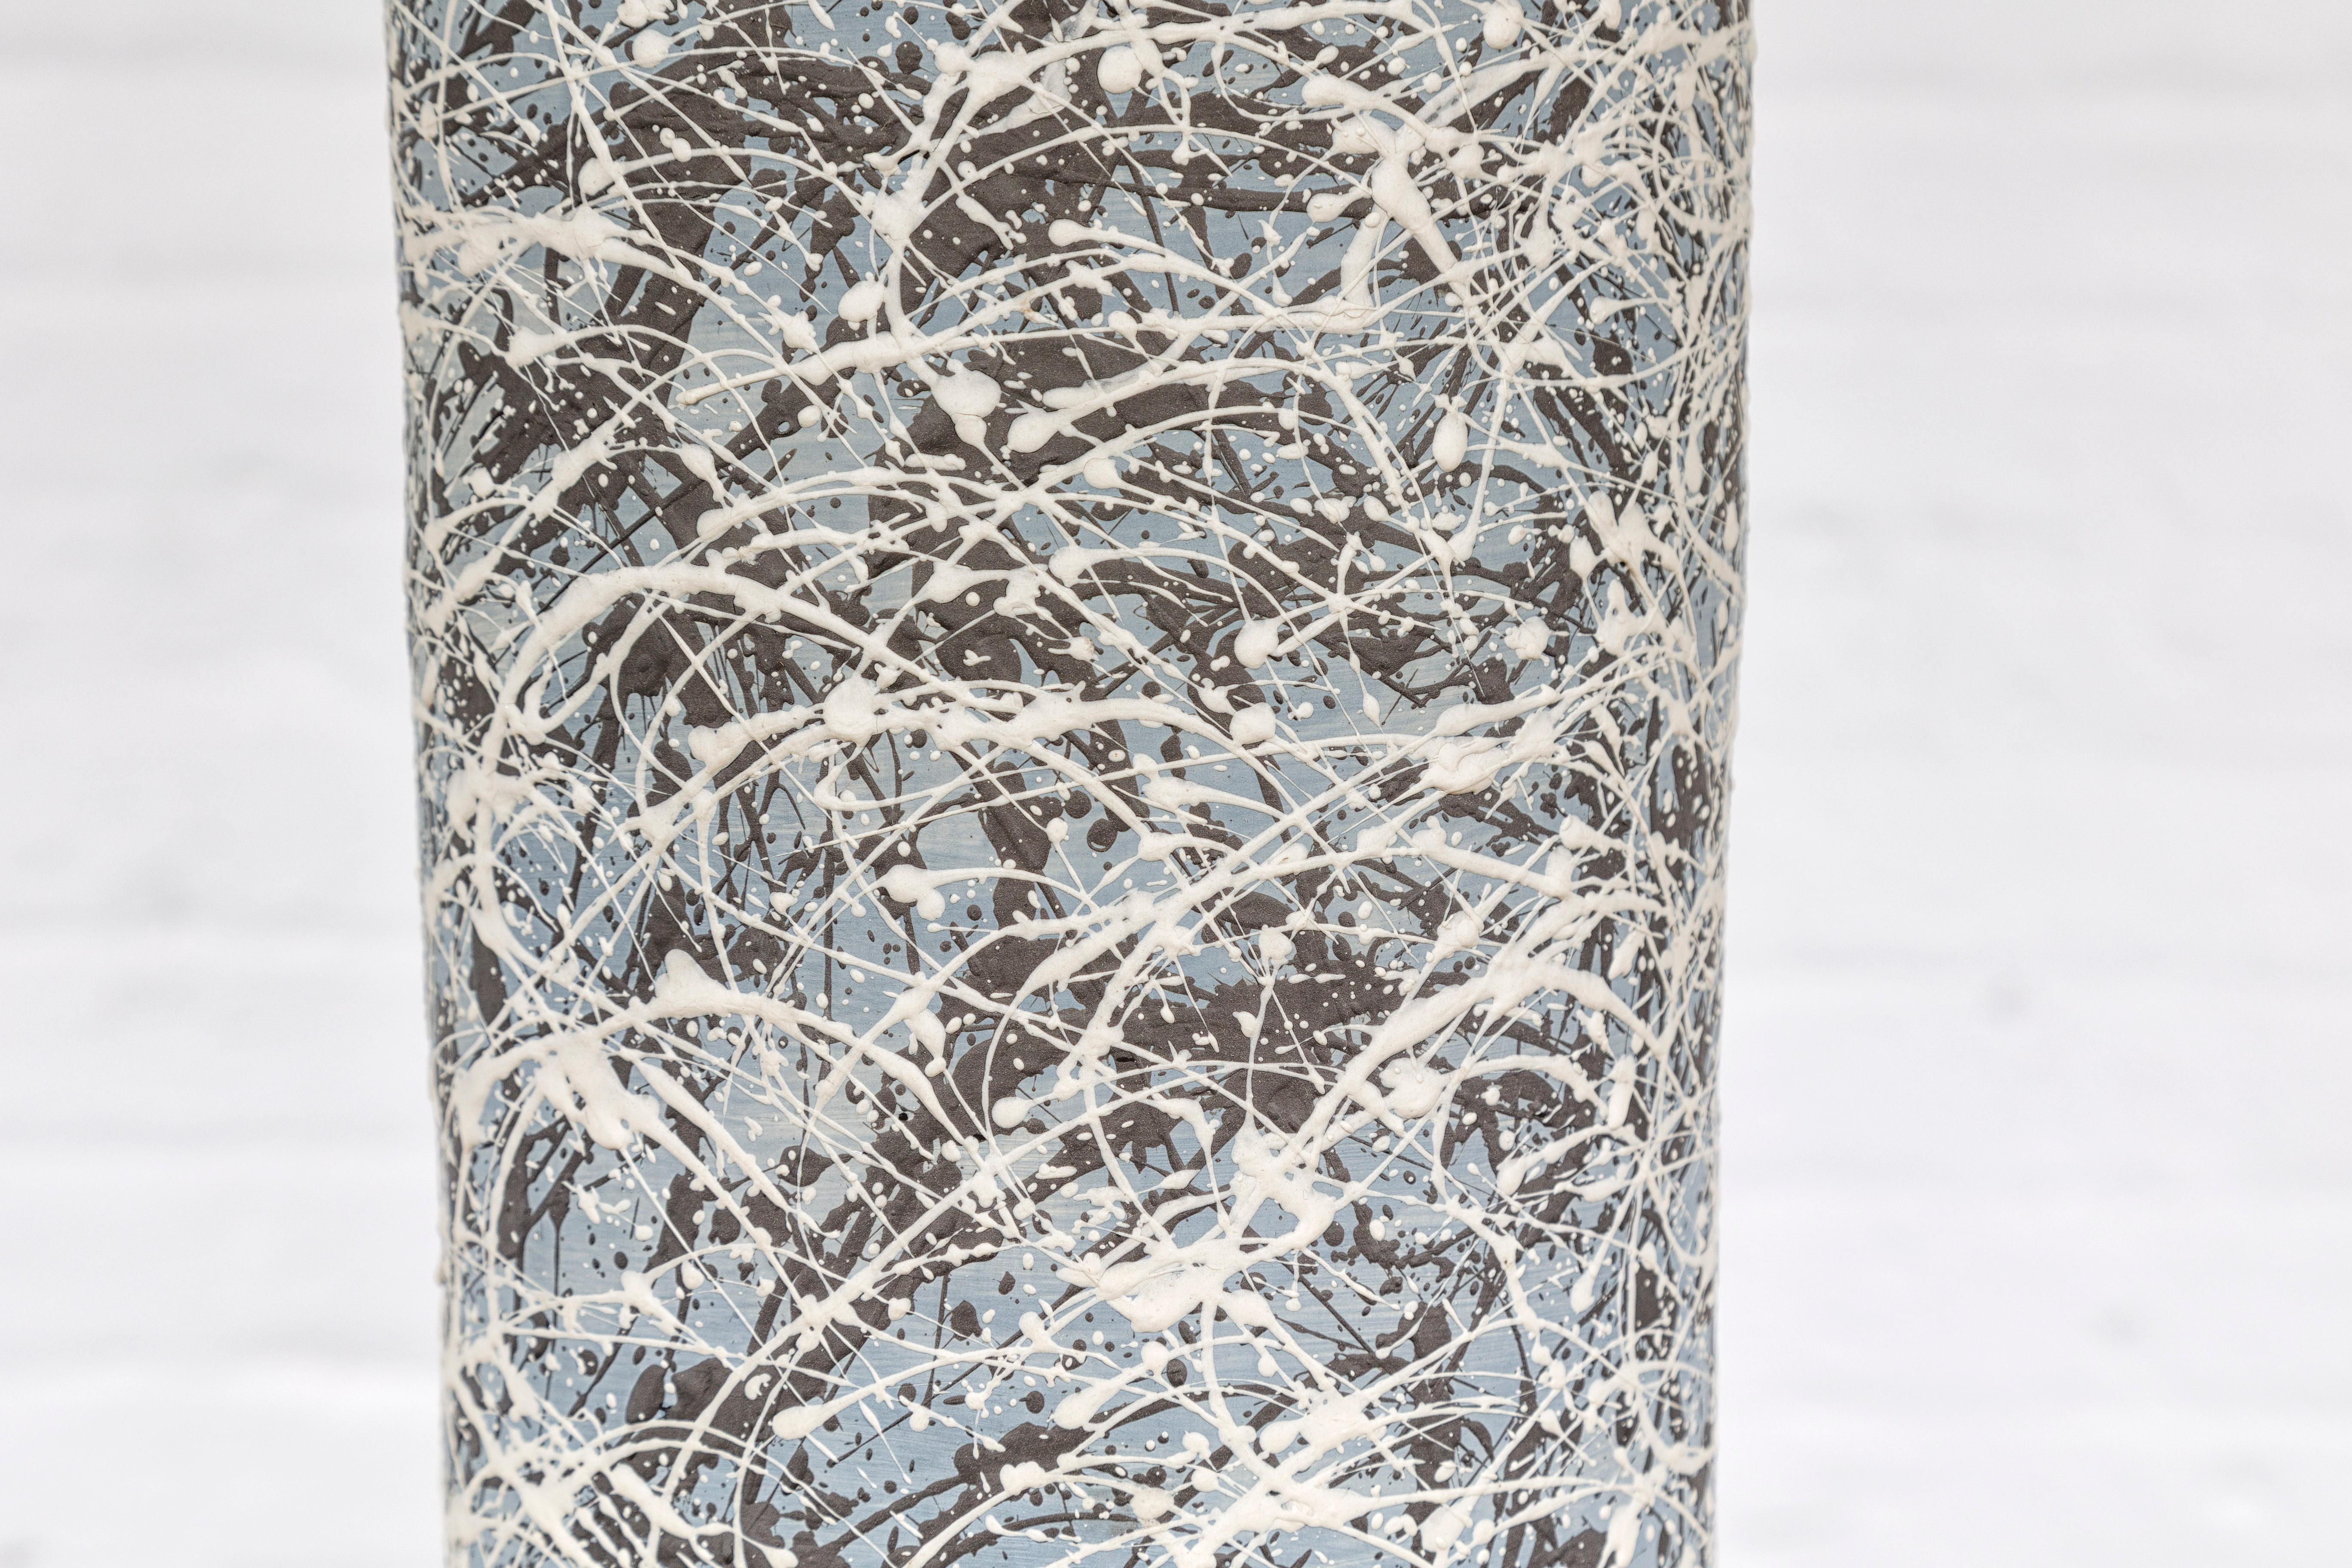 Textured Blue Gray, White, Brown and Black Spattered Ceramic Vase For Sale 5